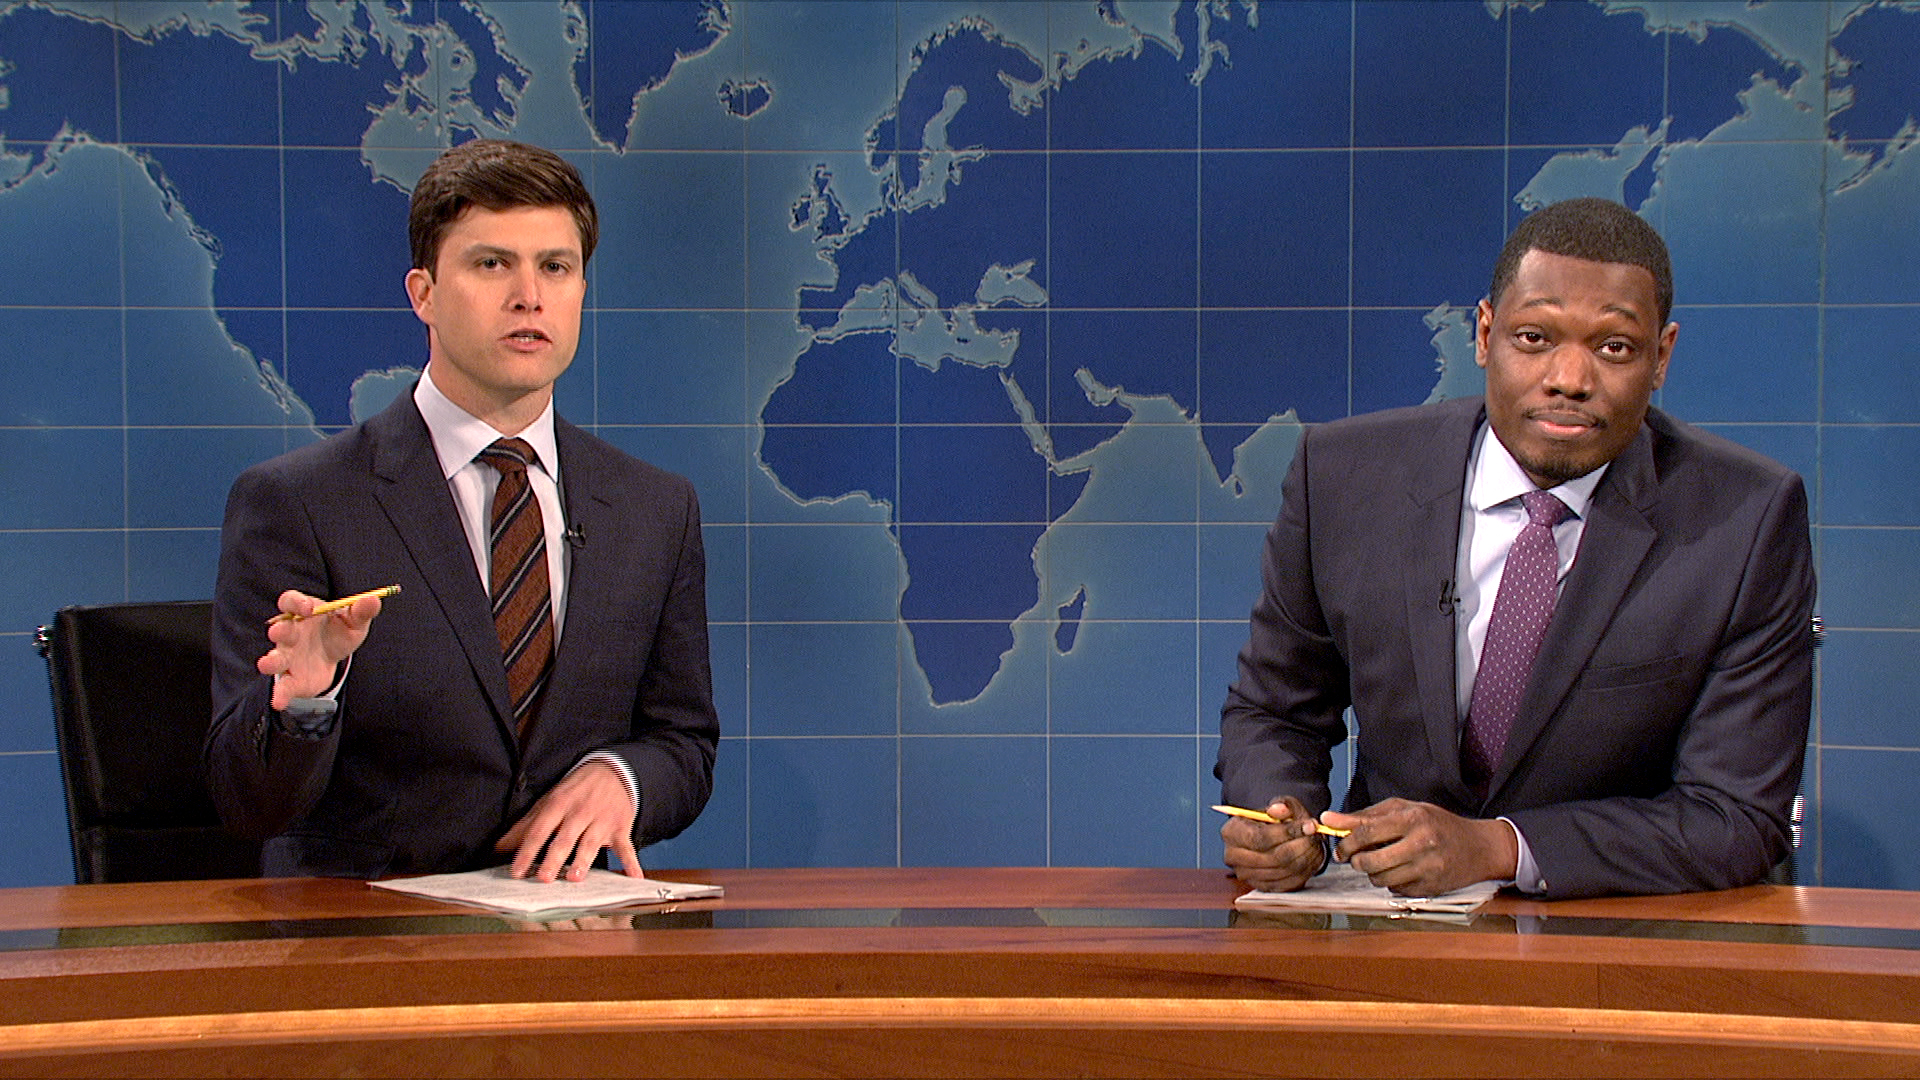 Watch Weekend Update: Colin Jost and Michael Che Talk Gun Control From Saturday Night ...1920 x 1080